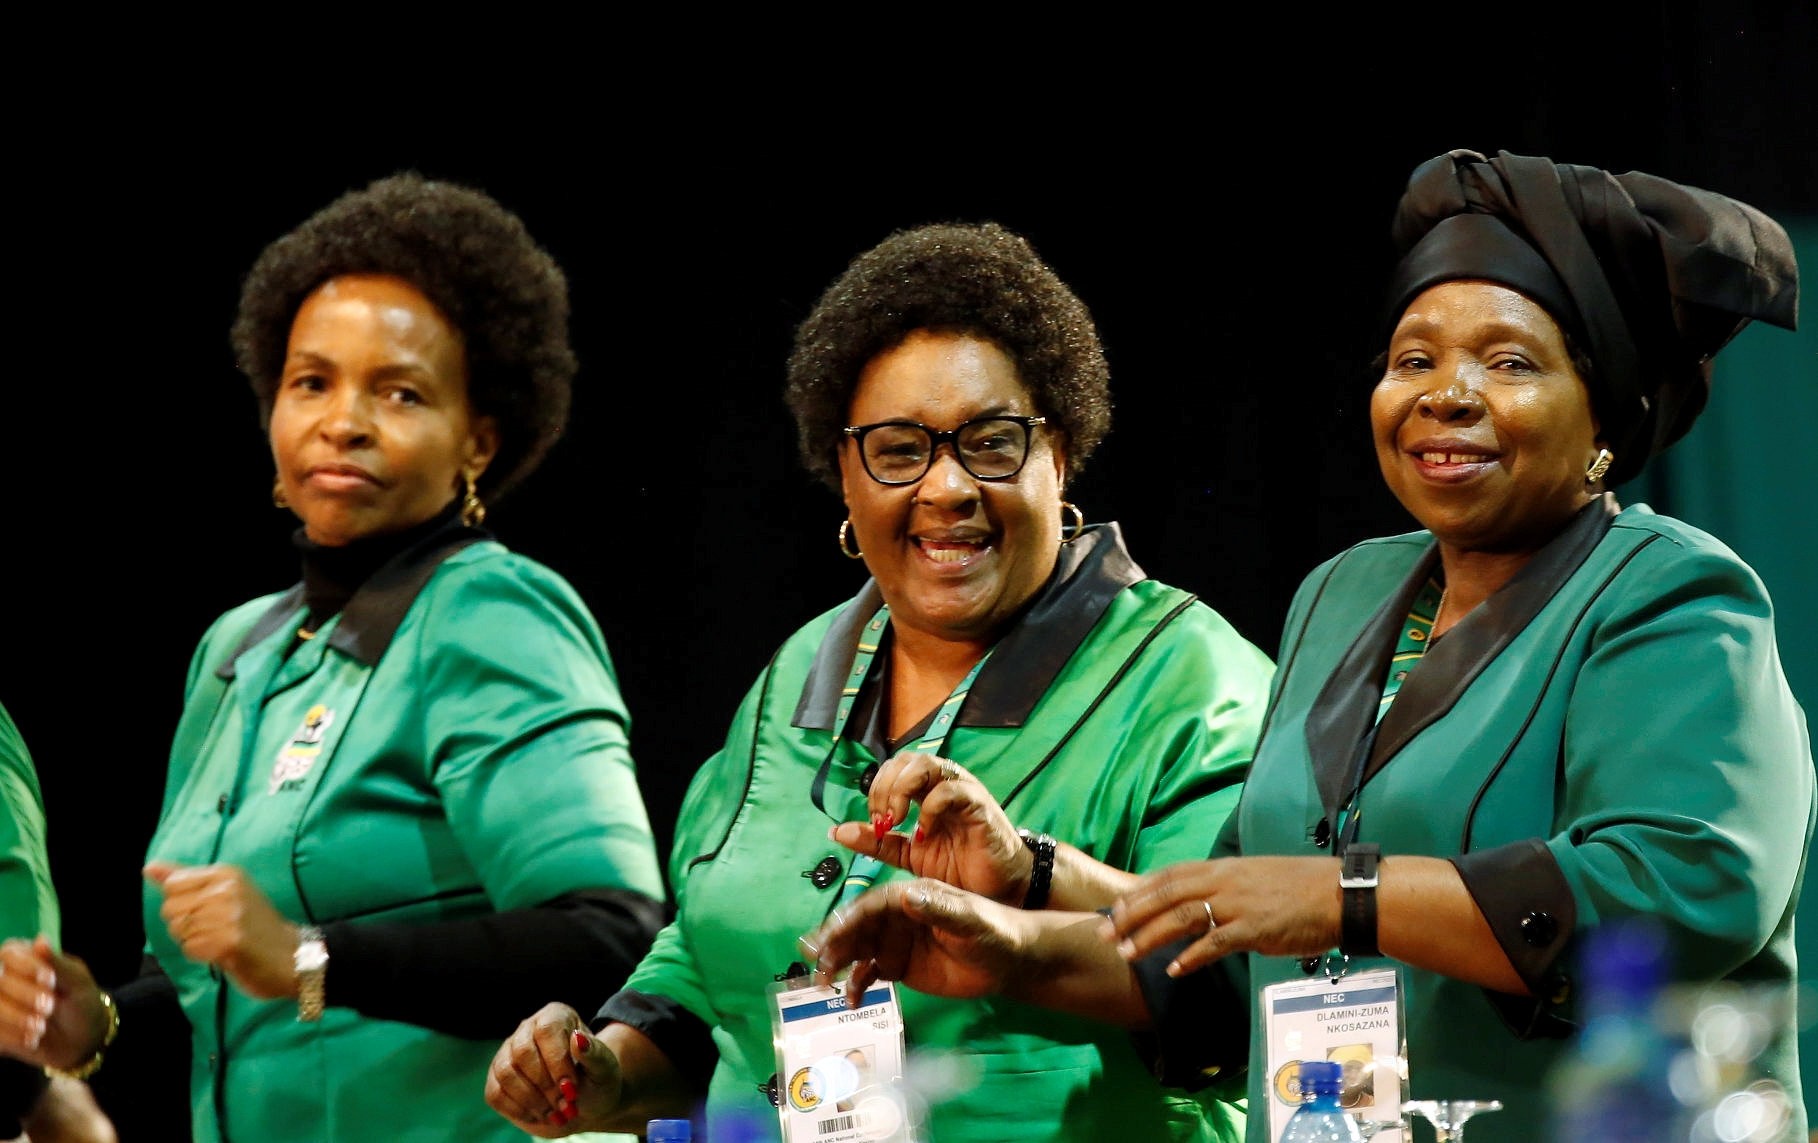 Nkosazana Dlamini-Zuma (R), former minister and chairwoman of the African Union Commission, attends the 54th National Conference of the ruling African National Congress (ANC) at the Nasrec Expo Centre in Johannesburg, South Africa December 16, 2017. 